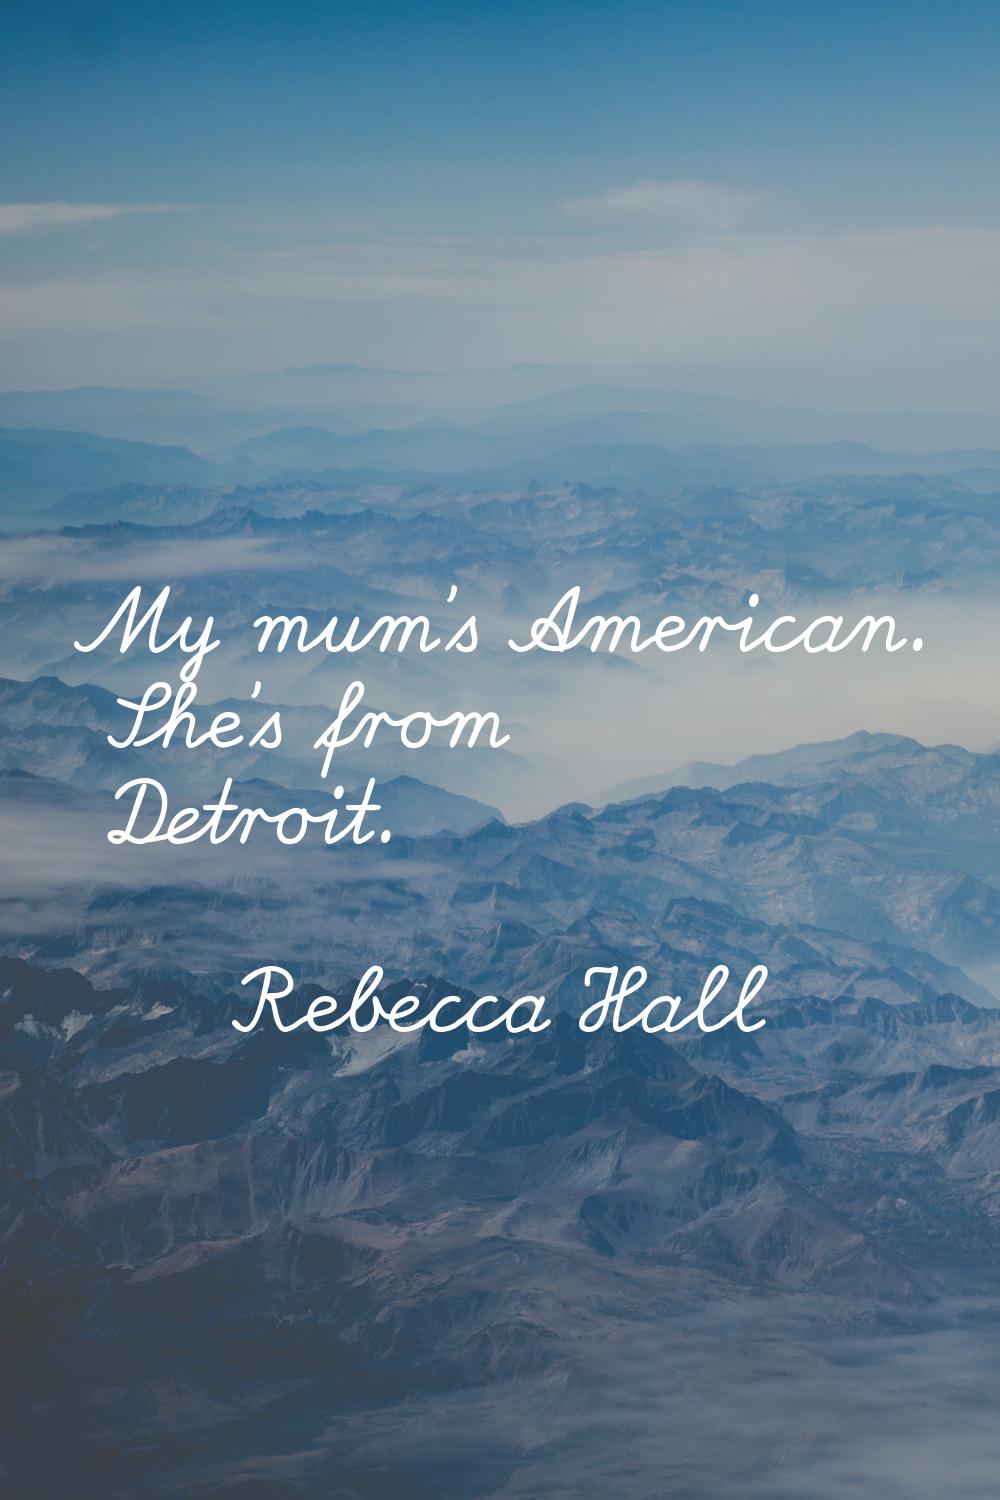 My mum's American. She's from Detroit.